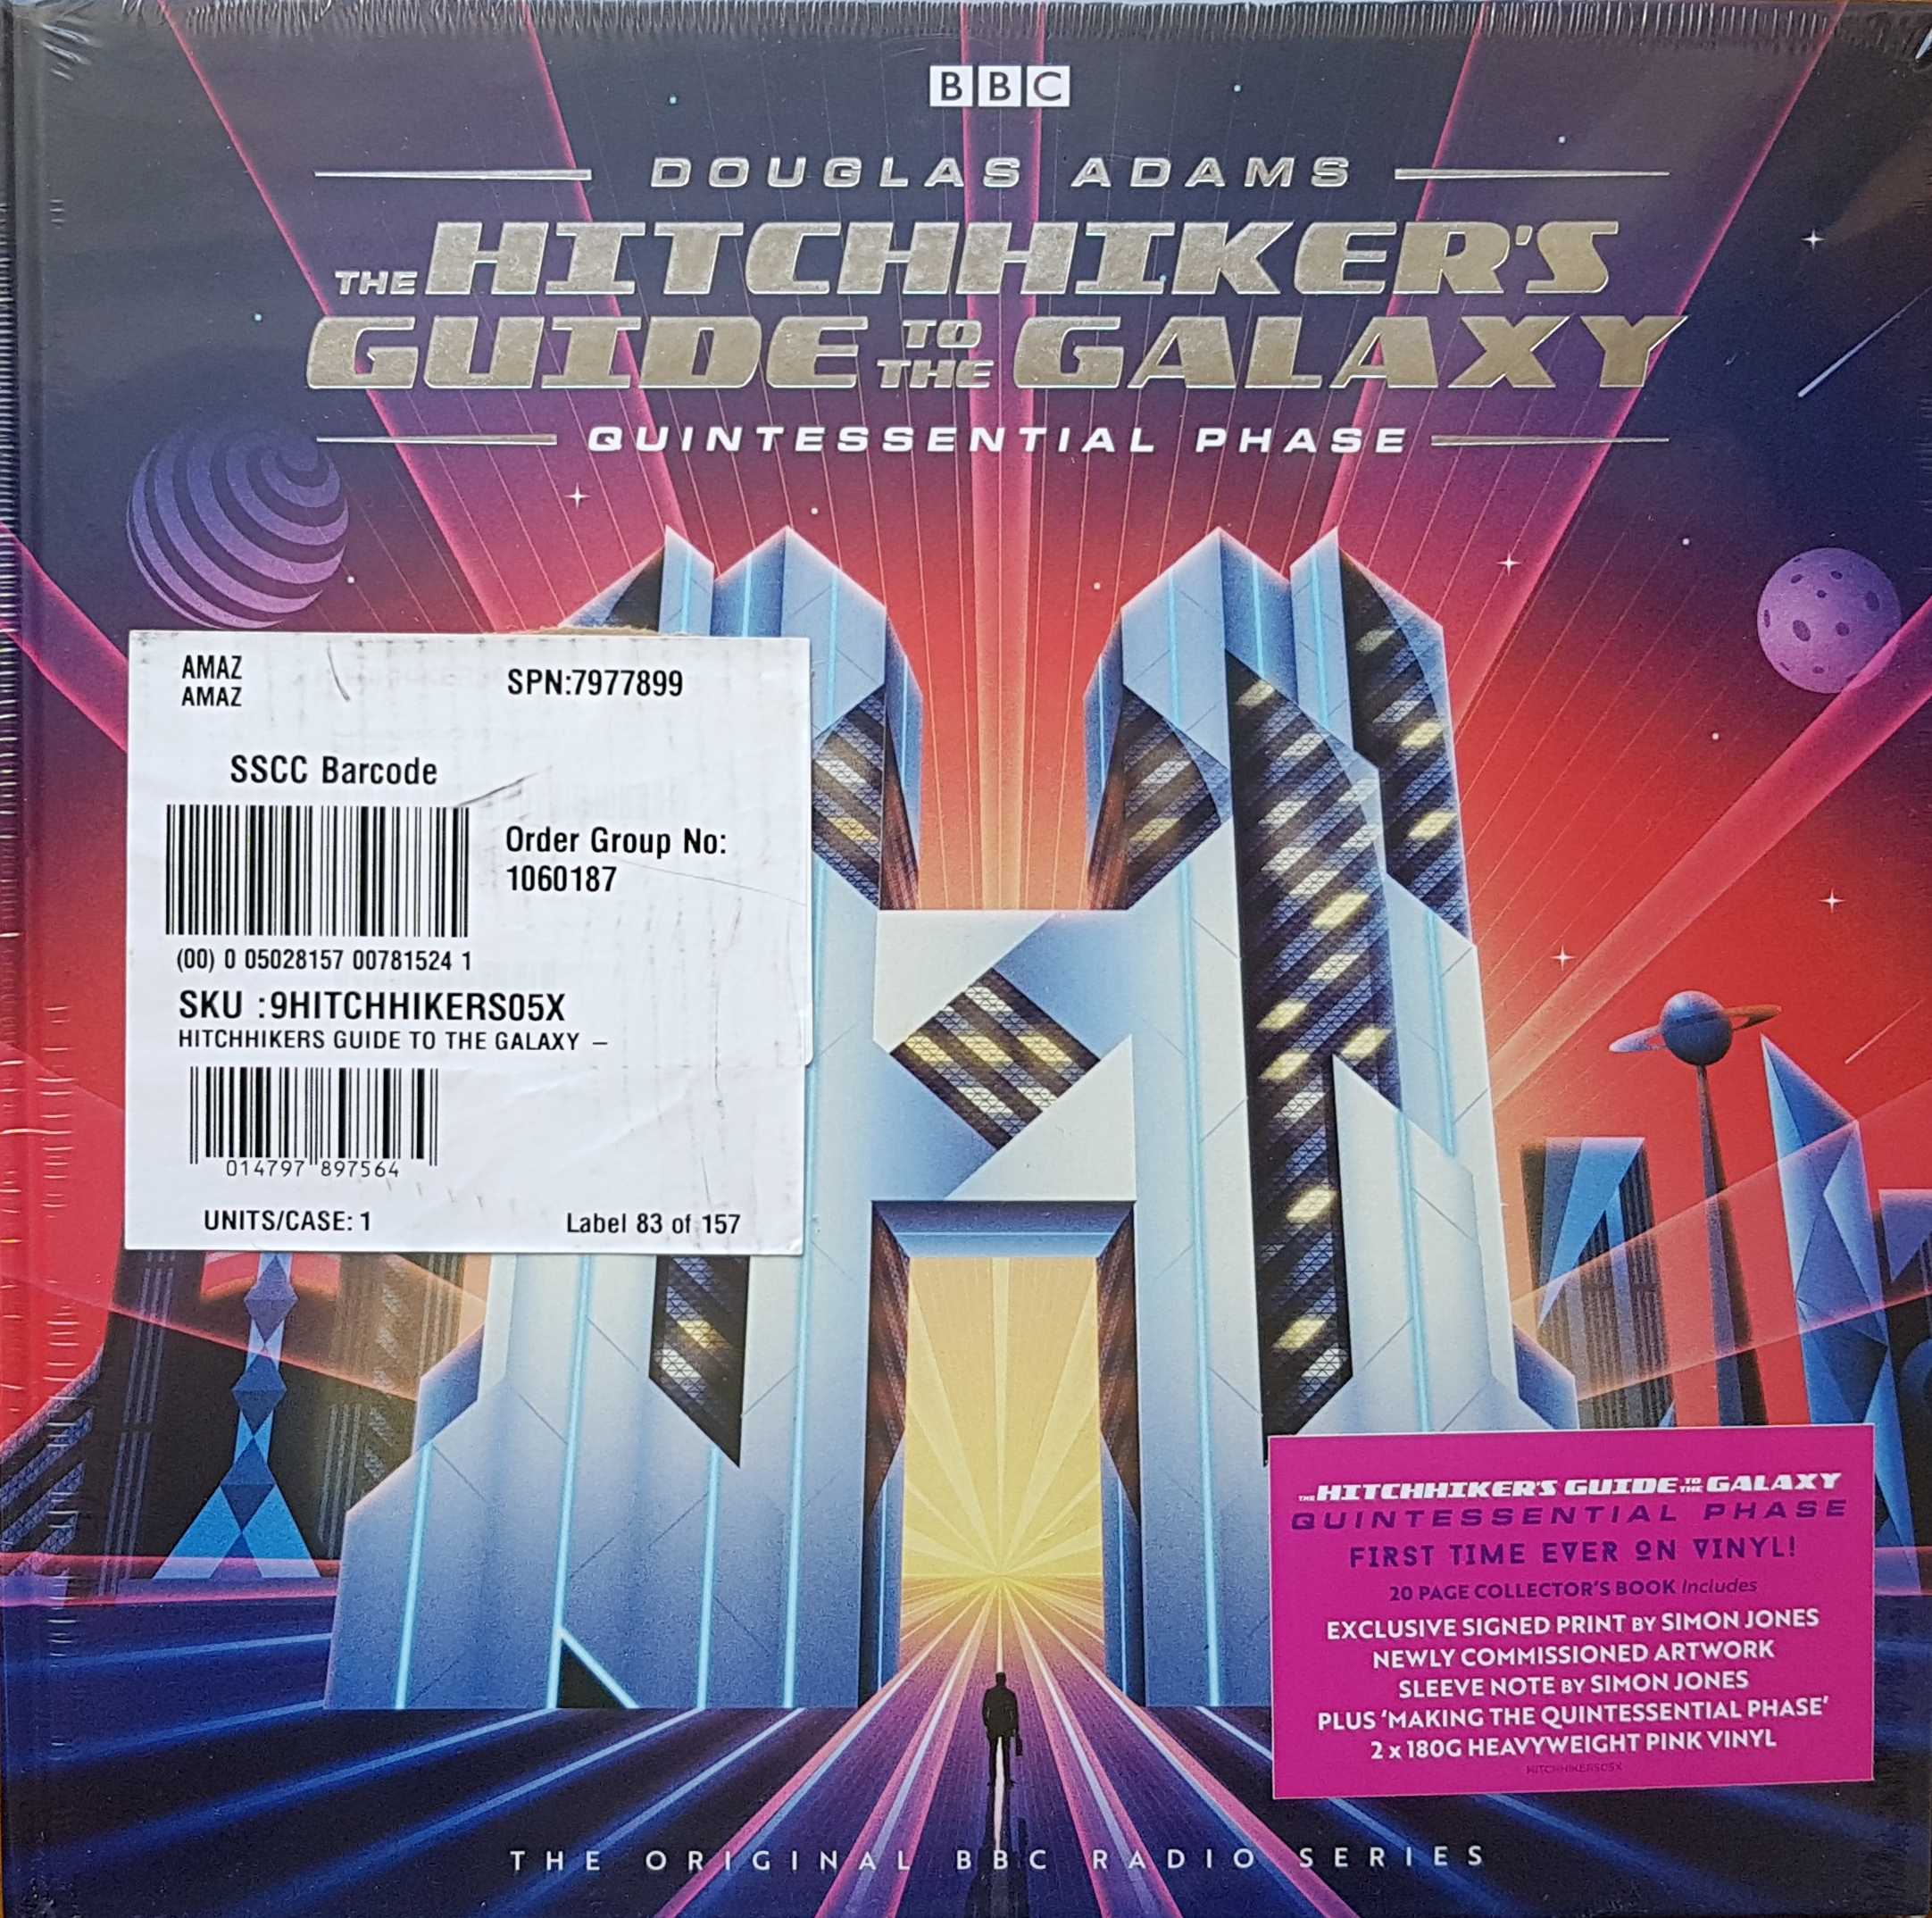 Picture of The hitchhiker's guide to the galaxy - Quintessential phrase by artist Douglas Adams from the BBC albums - Records and Tapes library